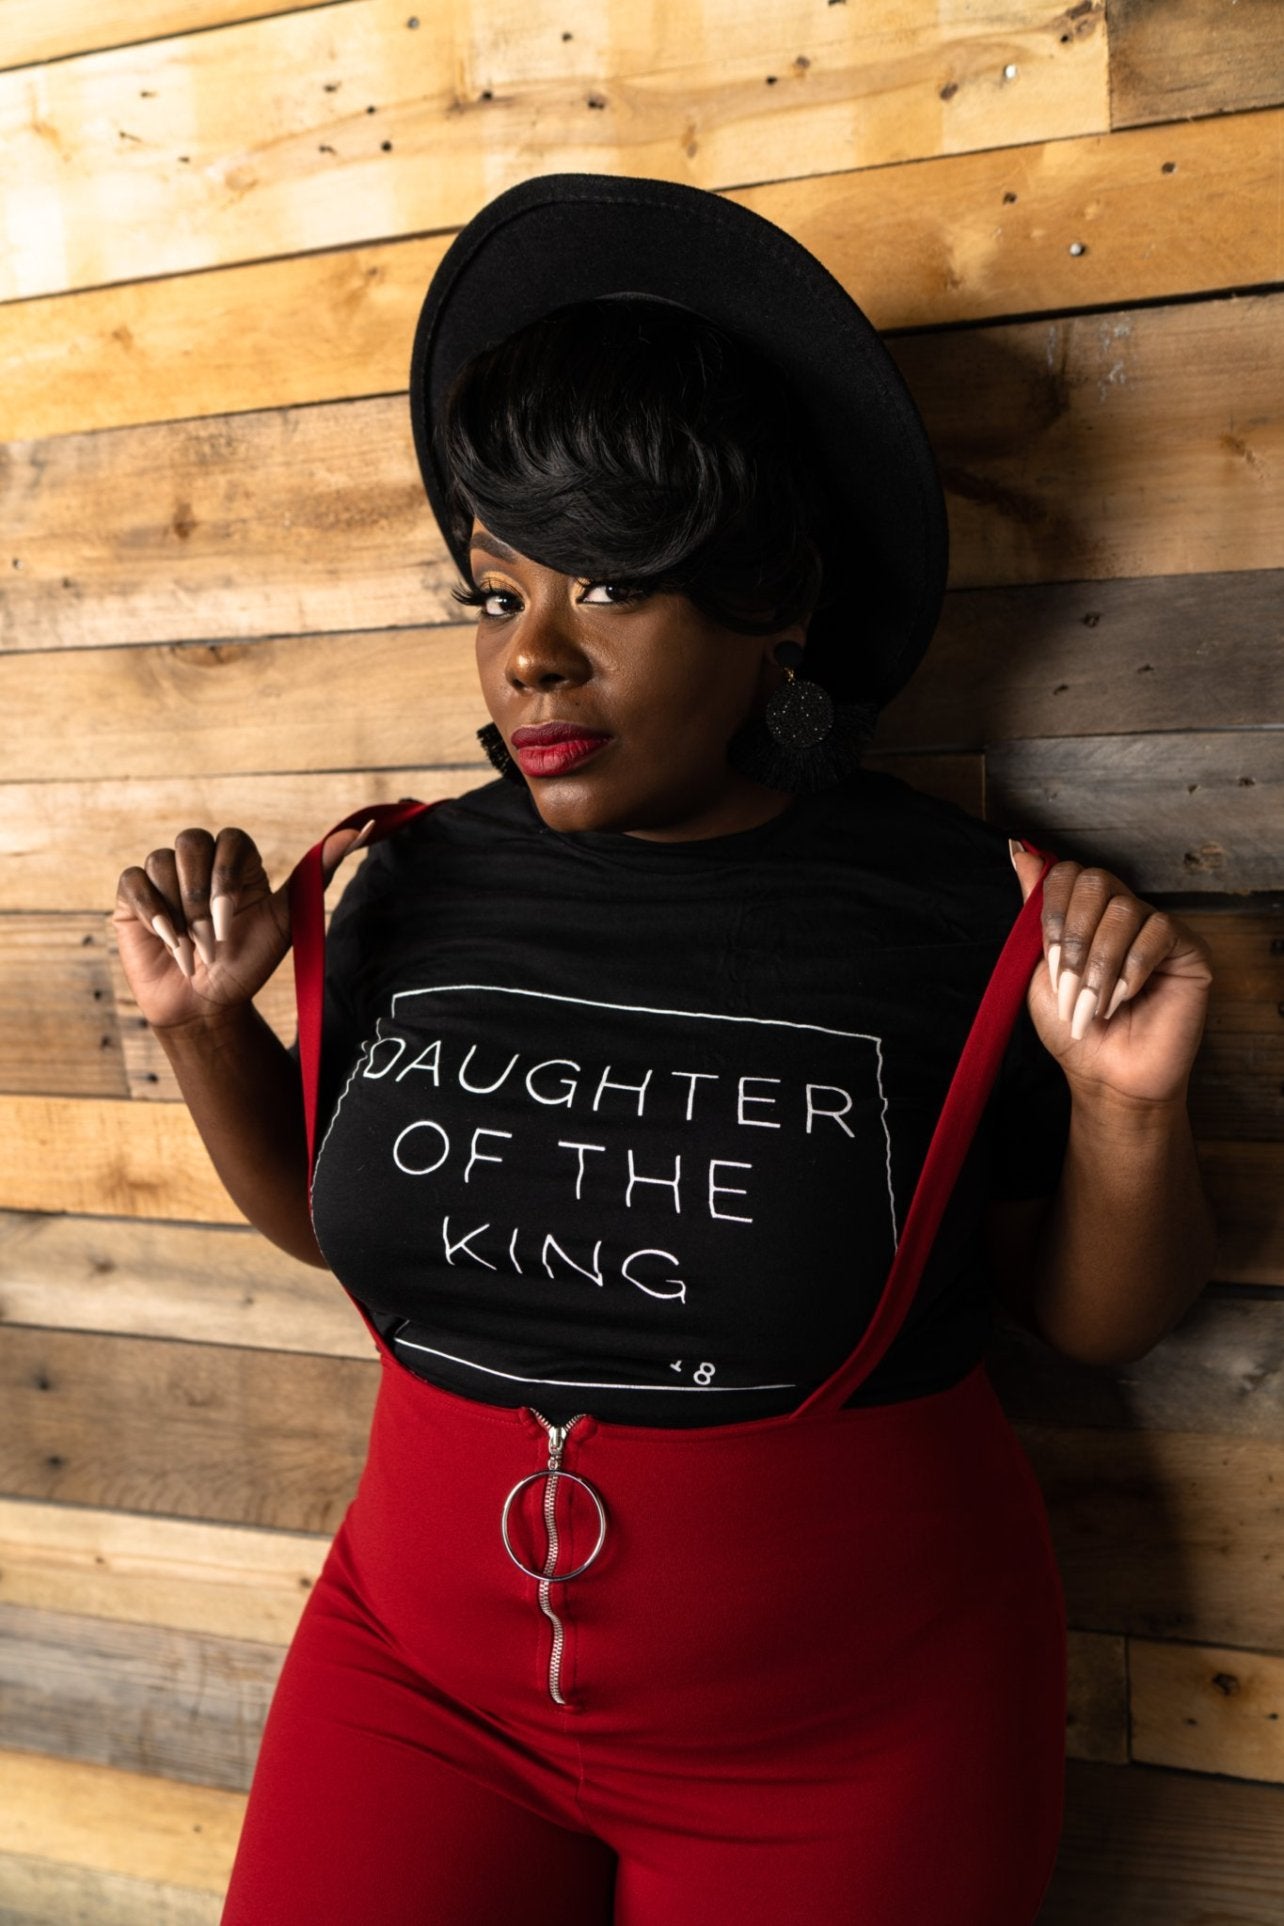 Daughter of the King Tshirt